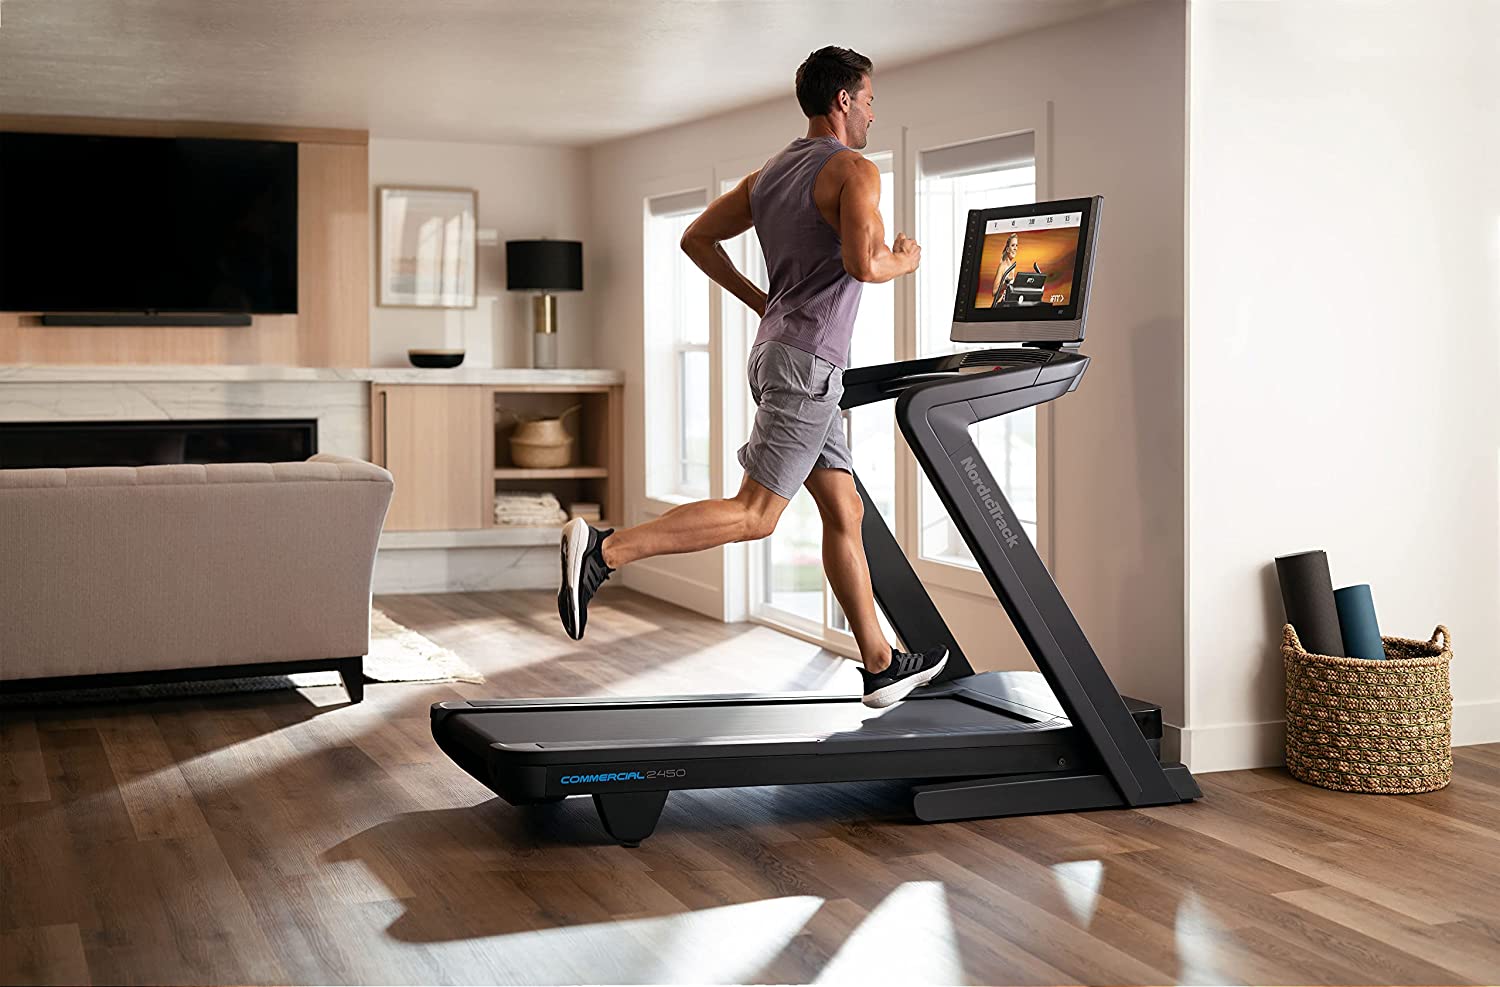 NordicTrack 2450 Commercial Treadmill Reviewed by BigGuyTreadmillReview.com